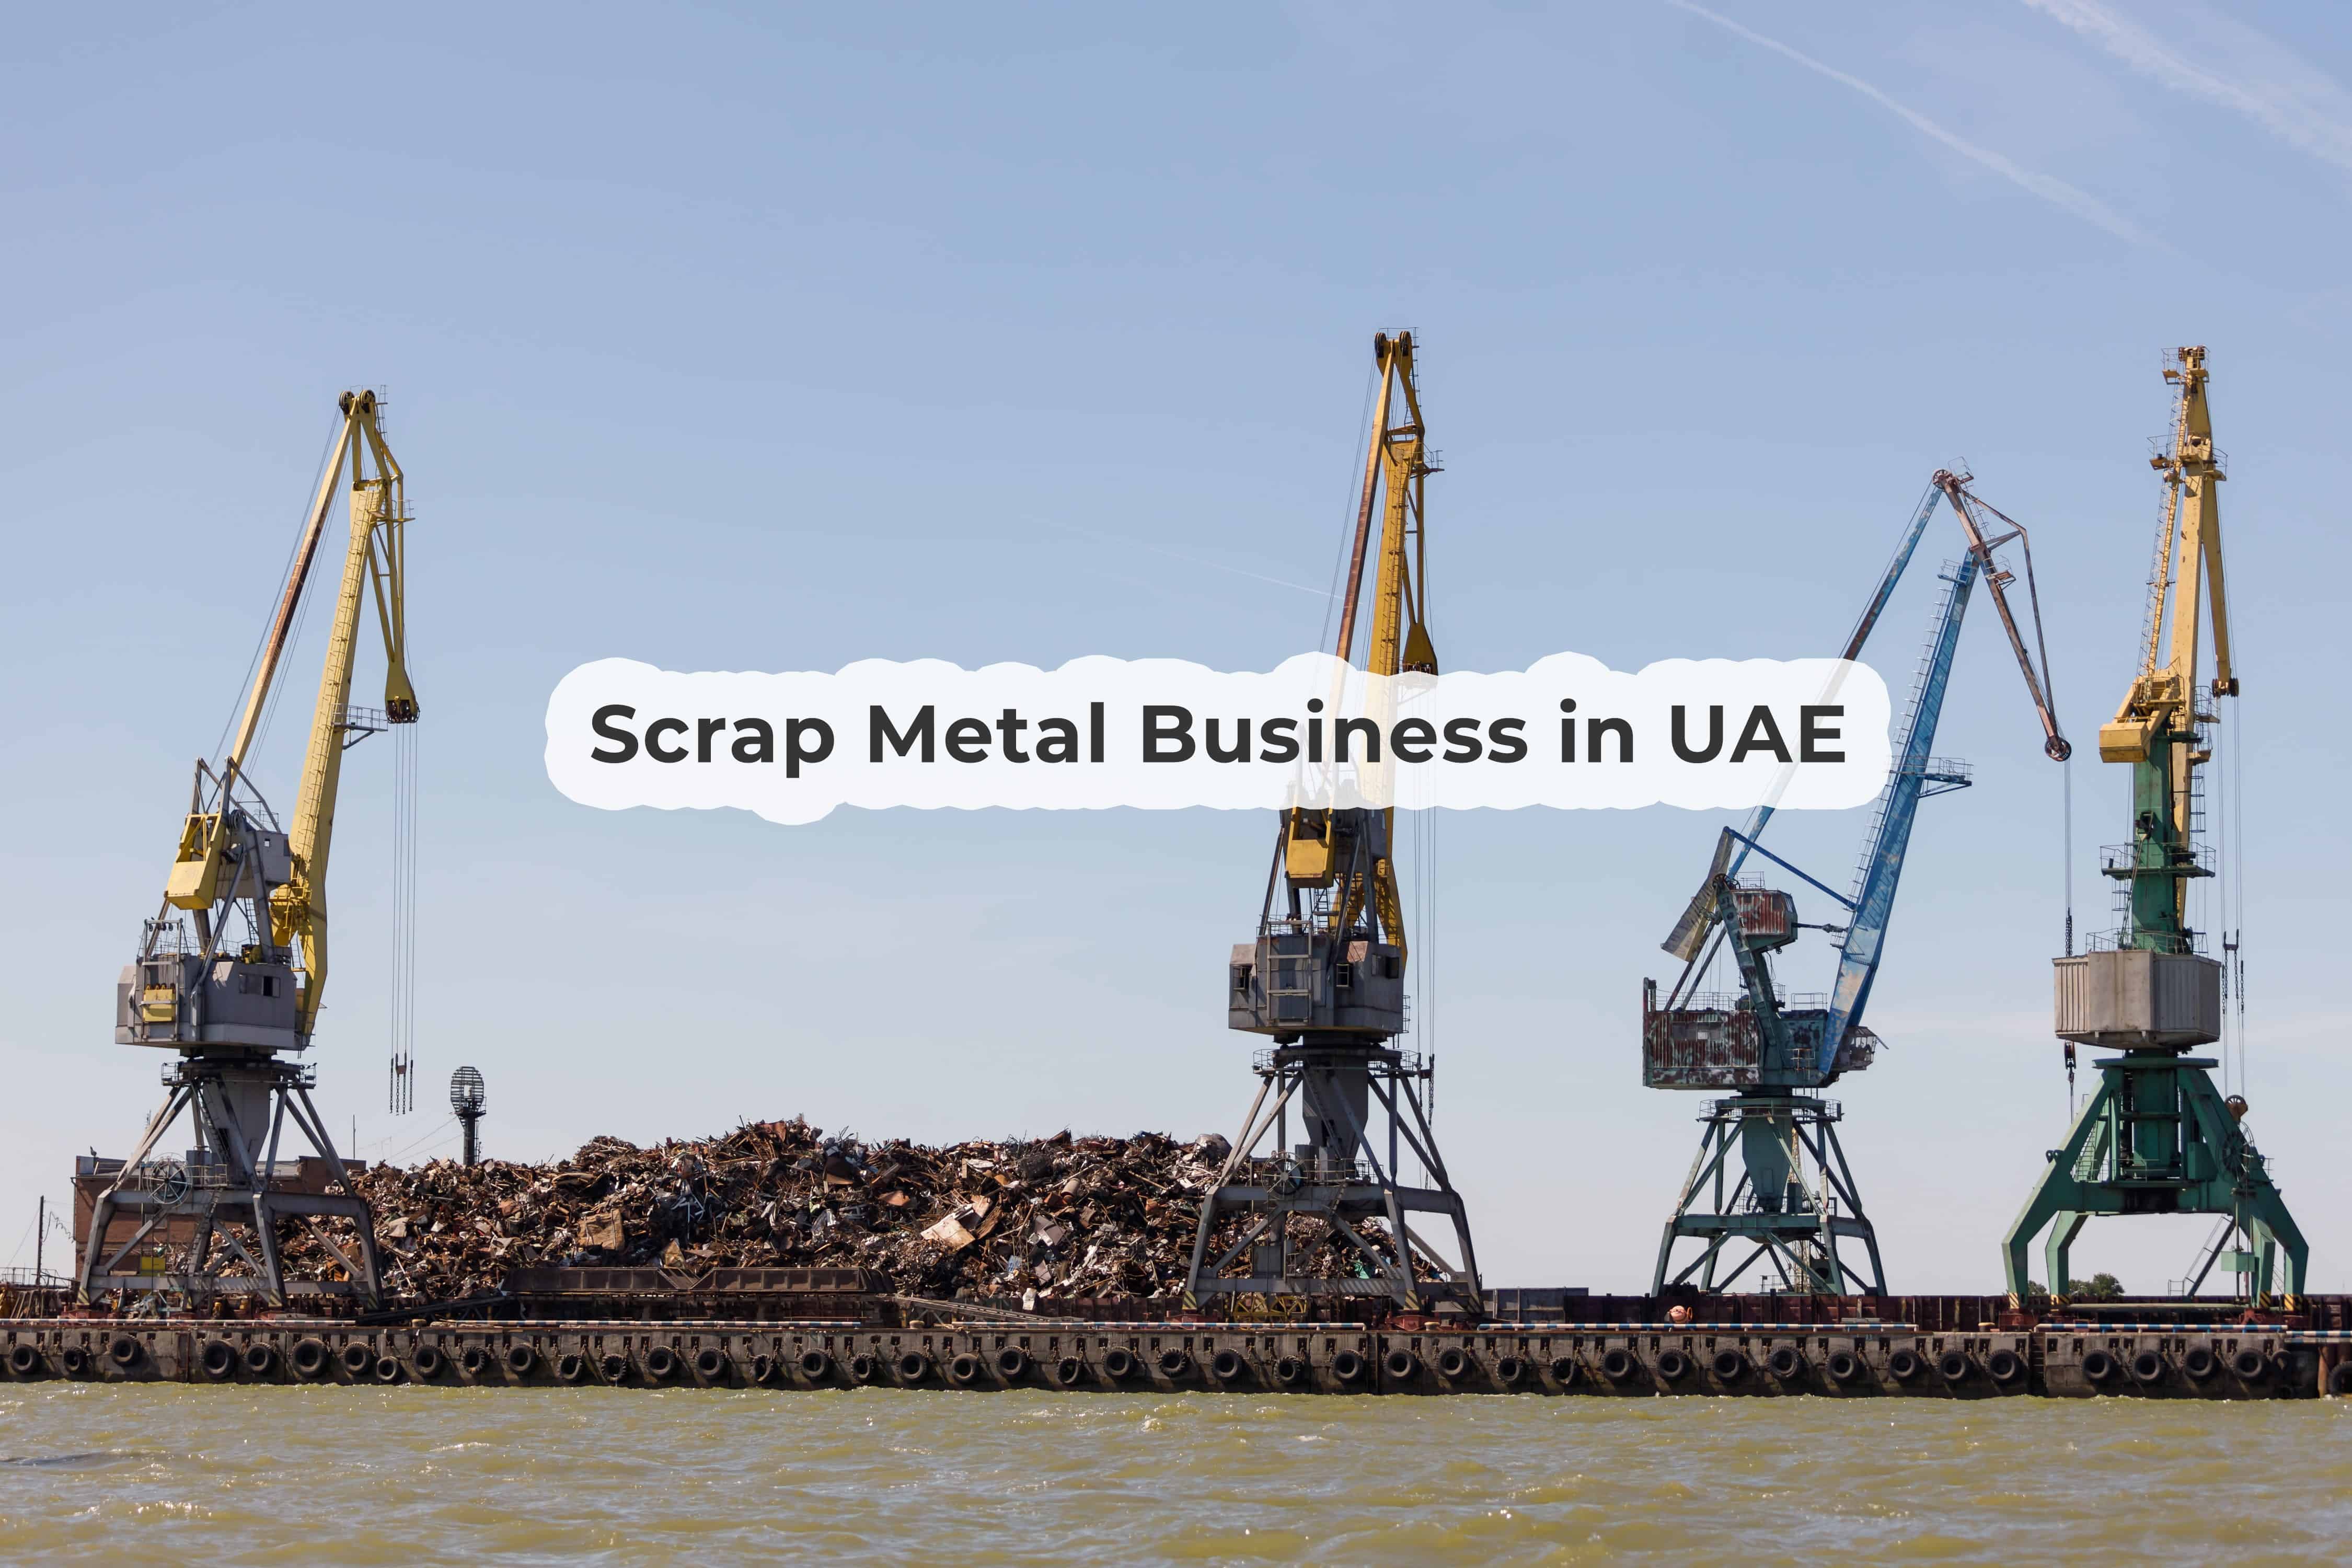 pier-lies-large-pile-metal-scrap-intended-loading-into-vessel-by-using-cranes-min